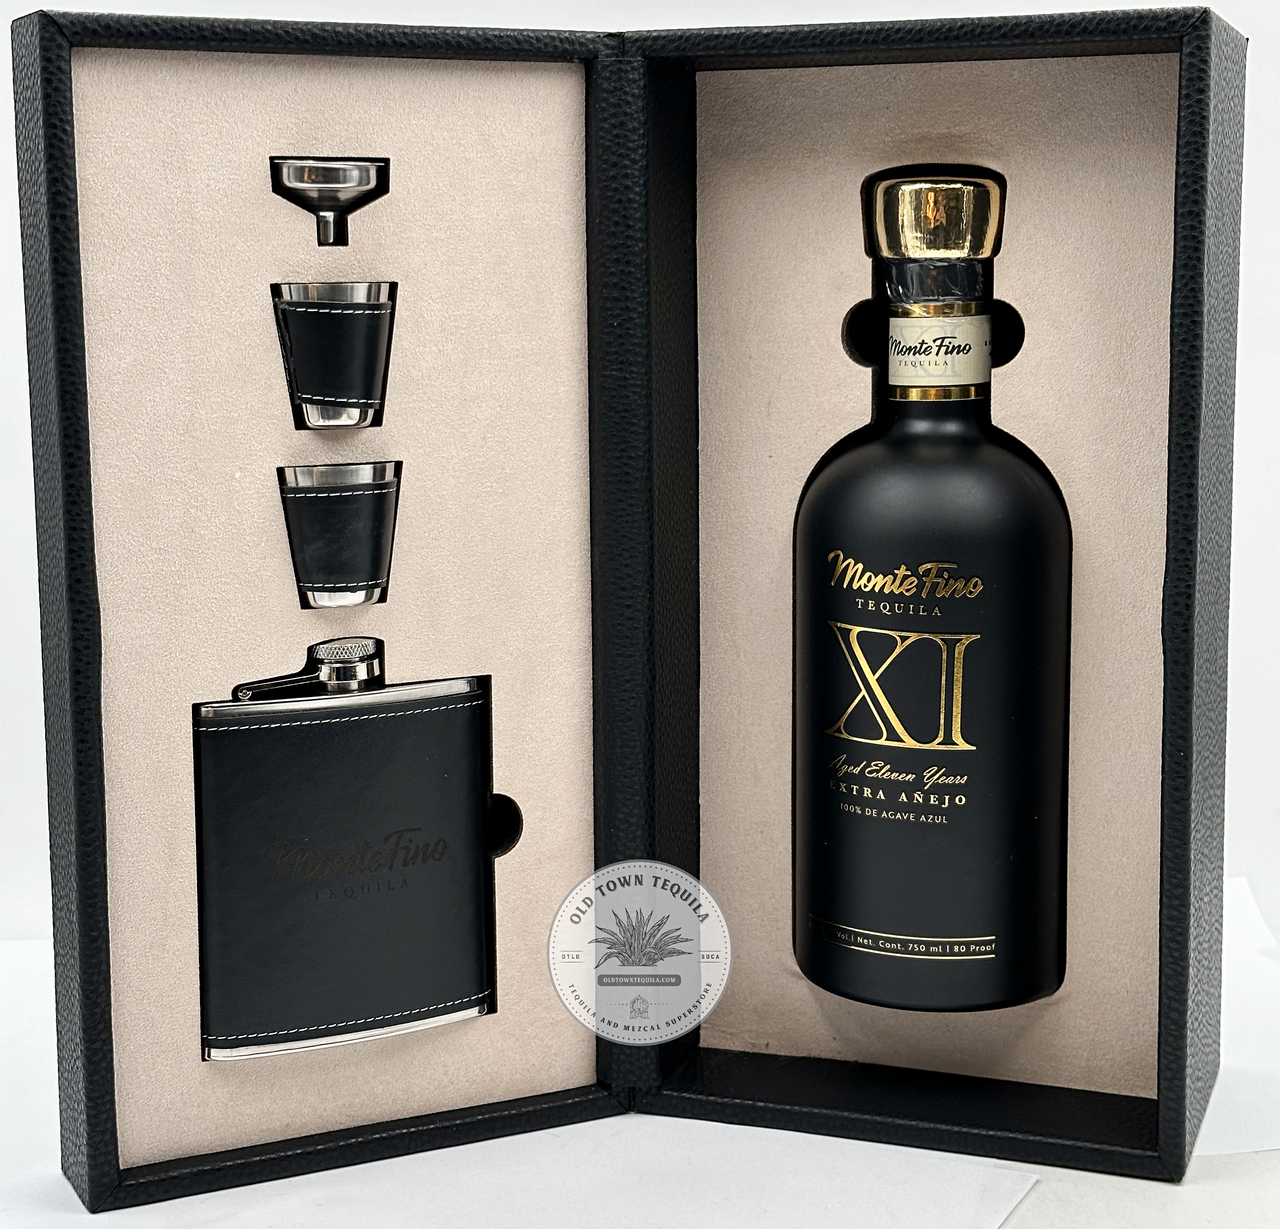 Monte Fino 11 Year Extra Anejo Tequila - Old Town Tequila